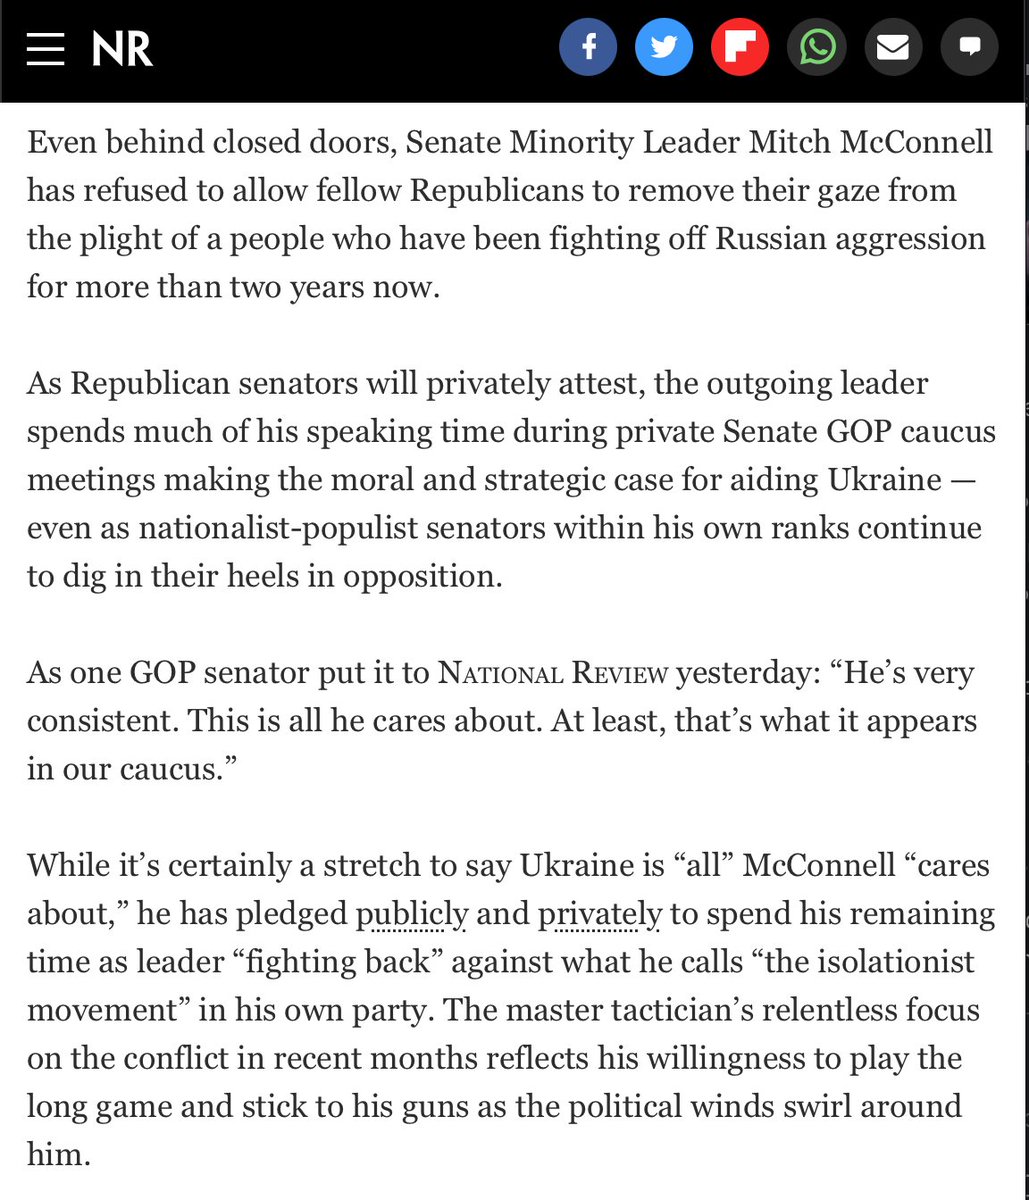 Mitch McConnell's relentless focus on making the moral and strategic case for aiding Ukraine in recent months reflects his willingness to play the long game and stick to his guns as the political winds swirl around him. W/ @brittybernstein nationalreview.com/2024/04/gop-de…